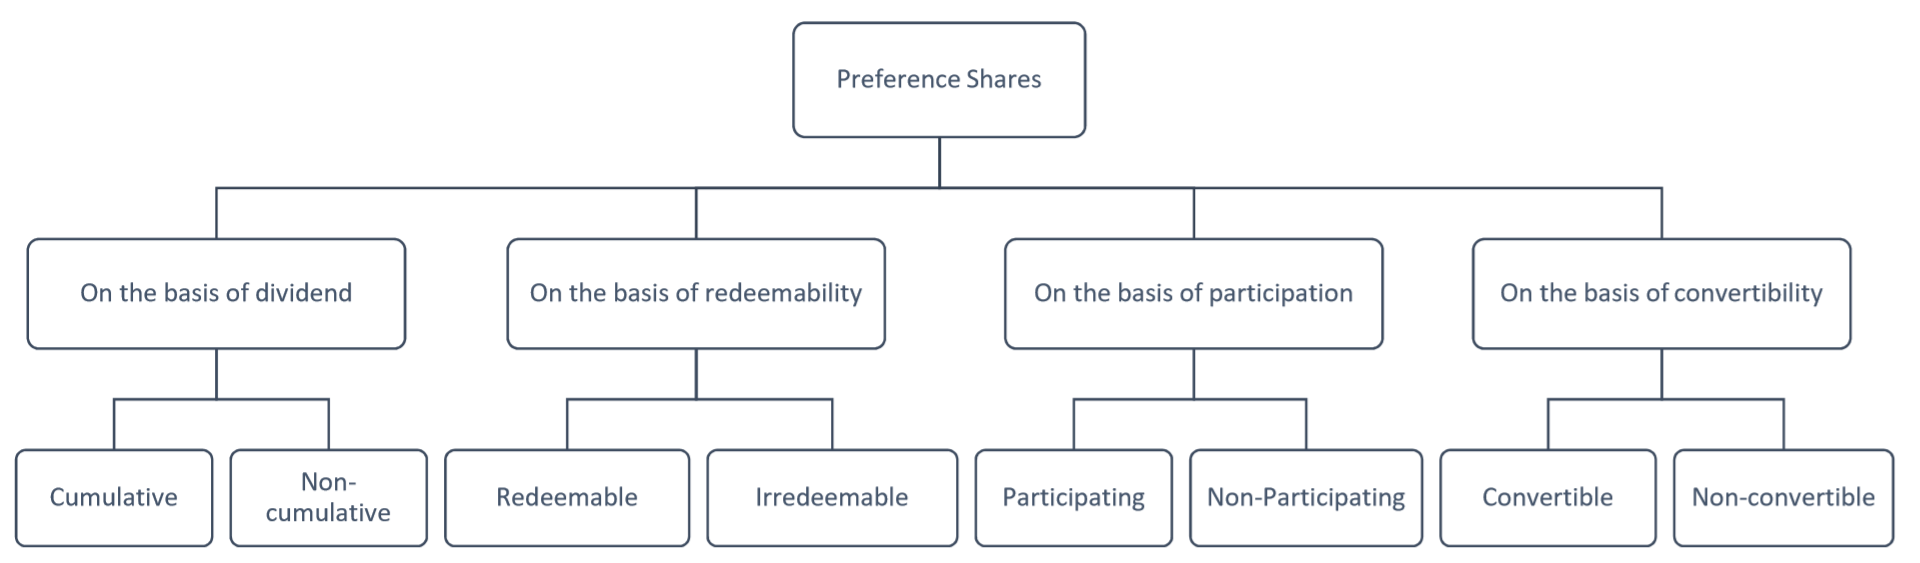 different types of preference shares